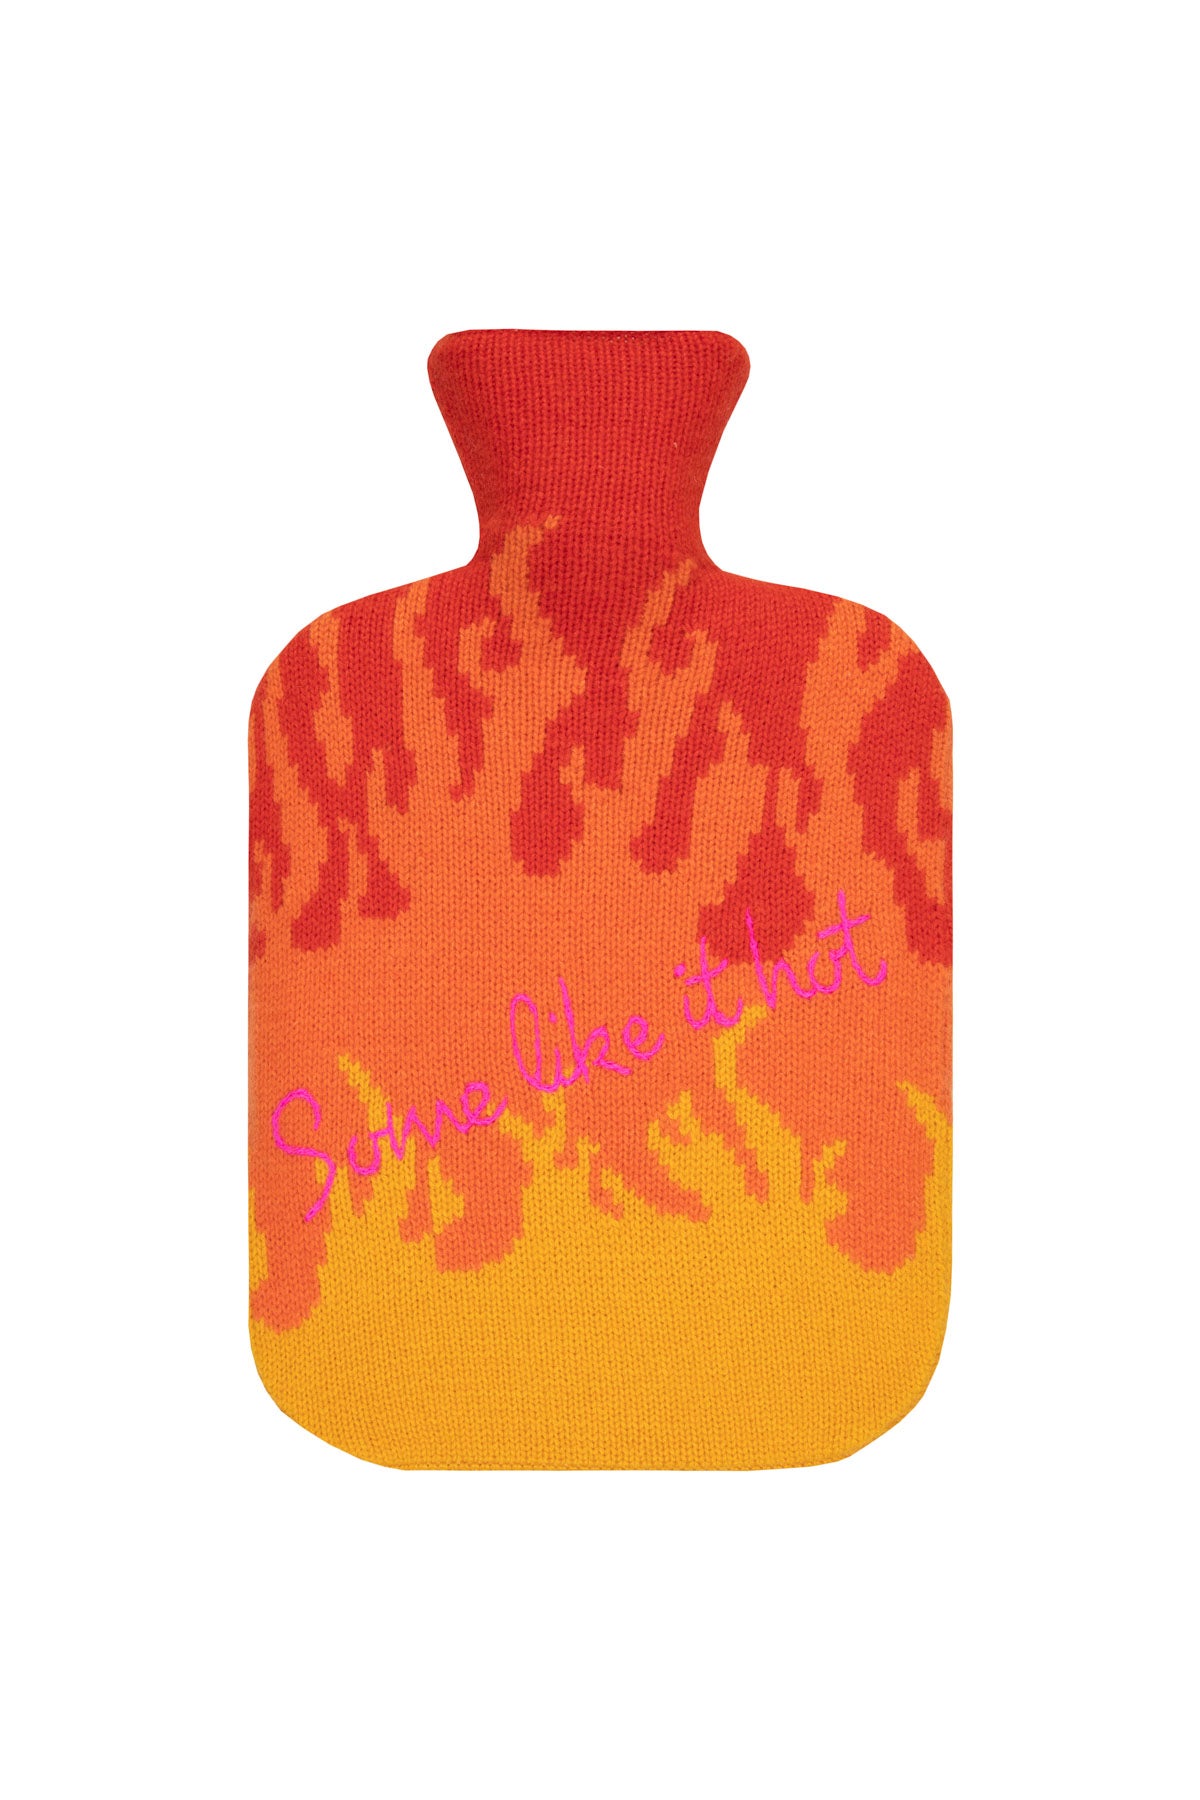 Flames Hot Water Bottle Cover - Red